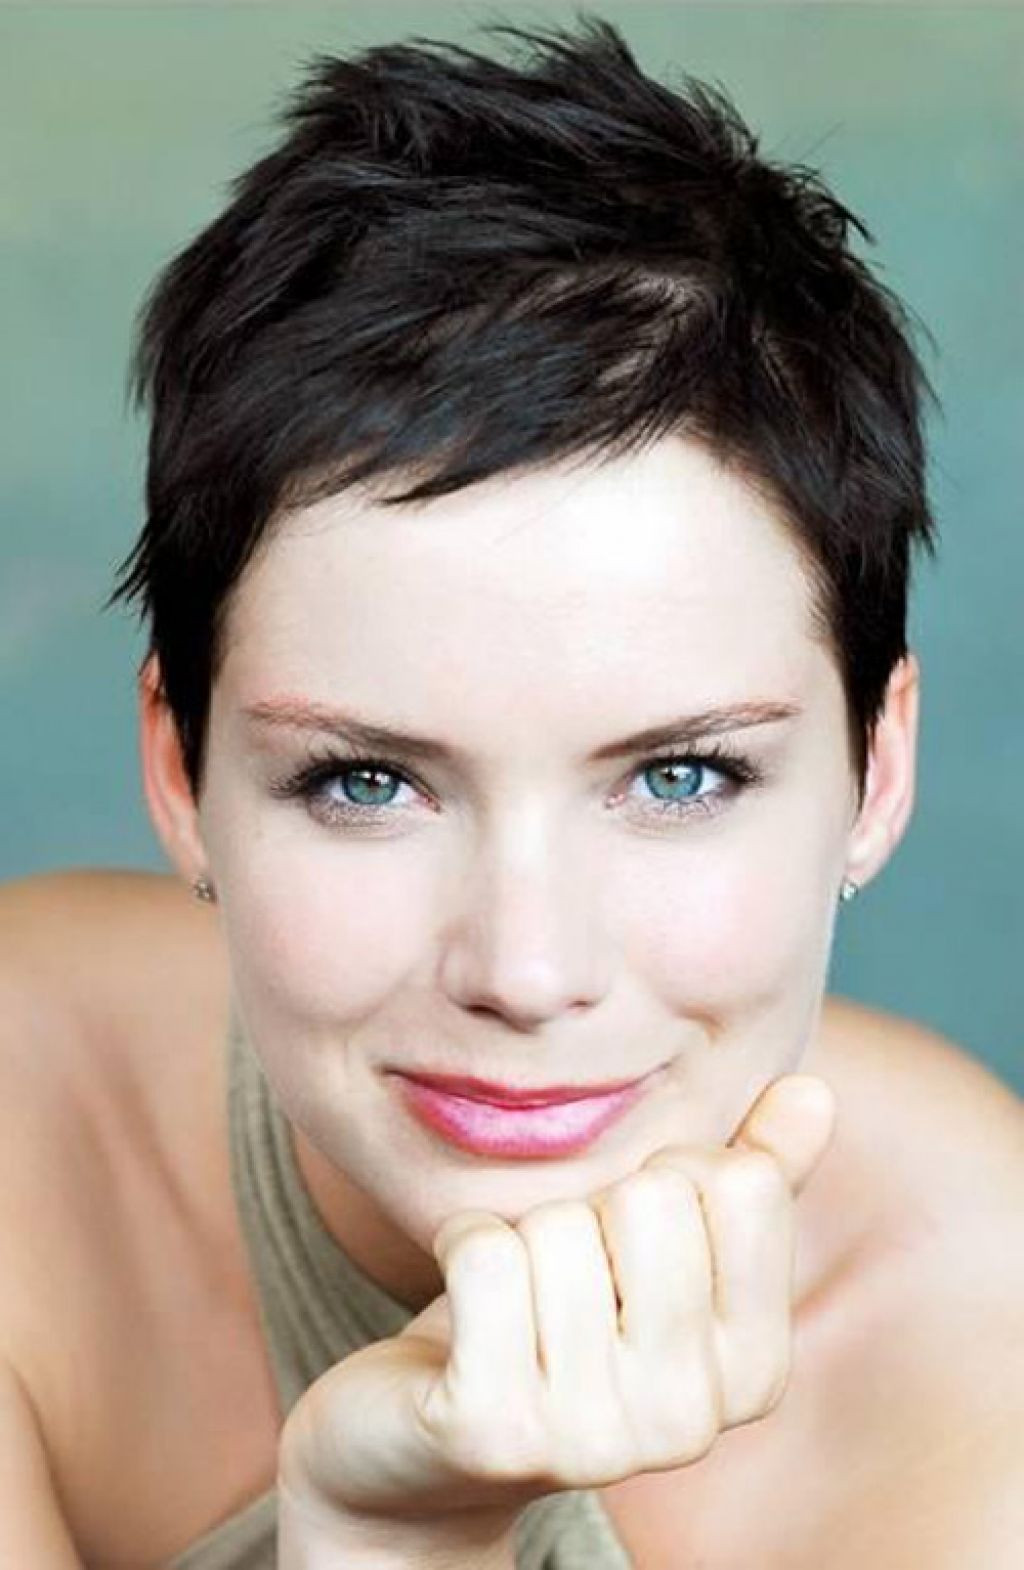 Super Short Women'S Haircuts
 Why Do Super Short Hairstyles Look So Beautiful on Older